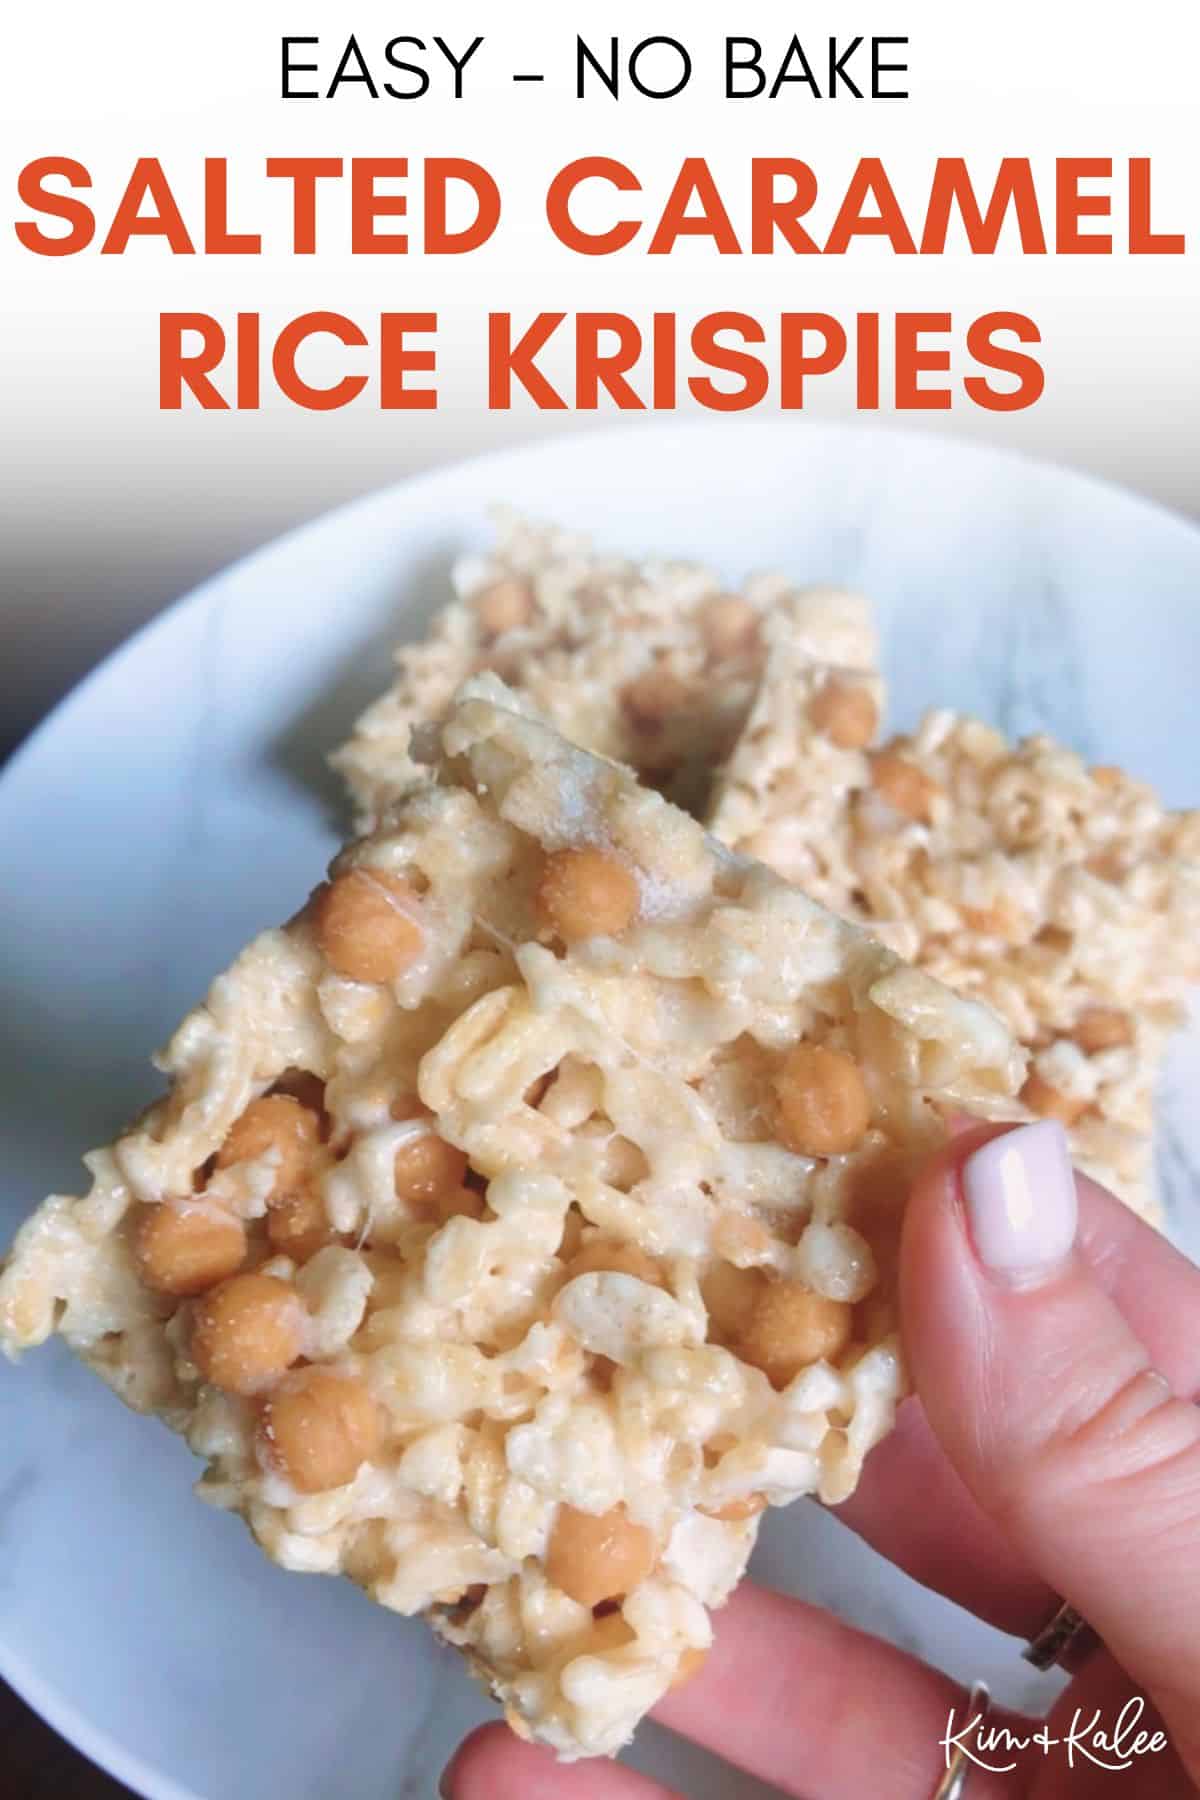 close up of 1 treat with the text overlay " easy no bake salted caramel rice krispies"